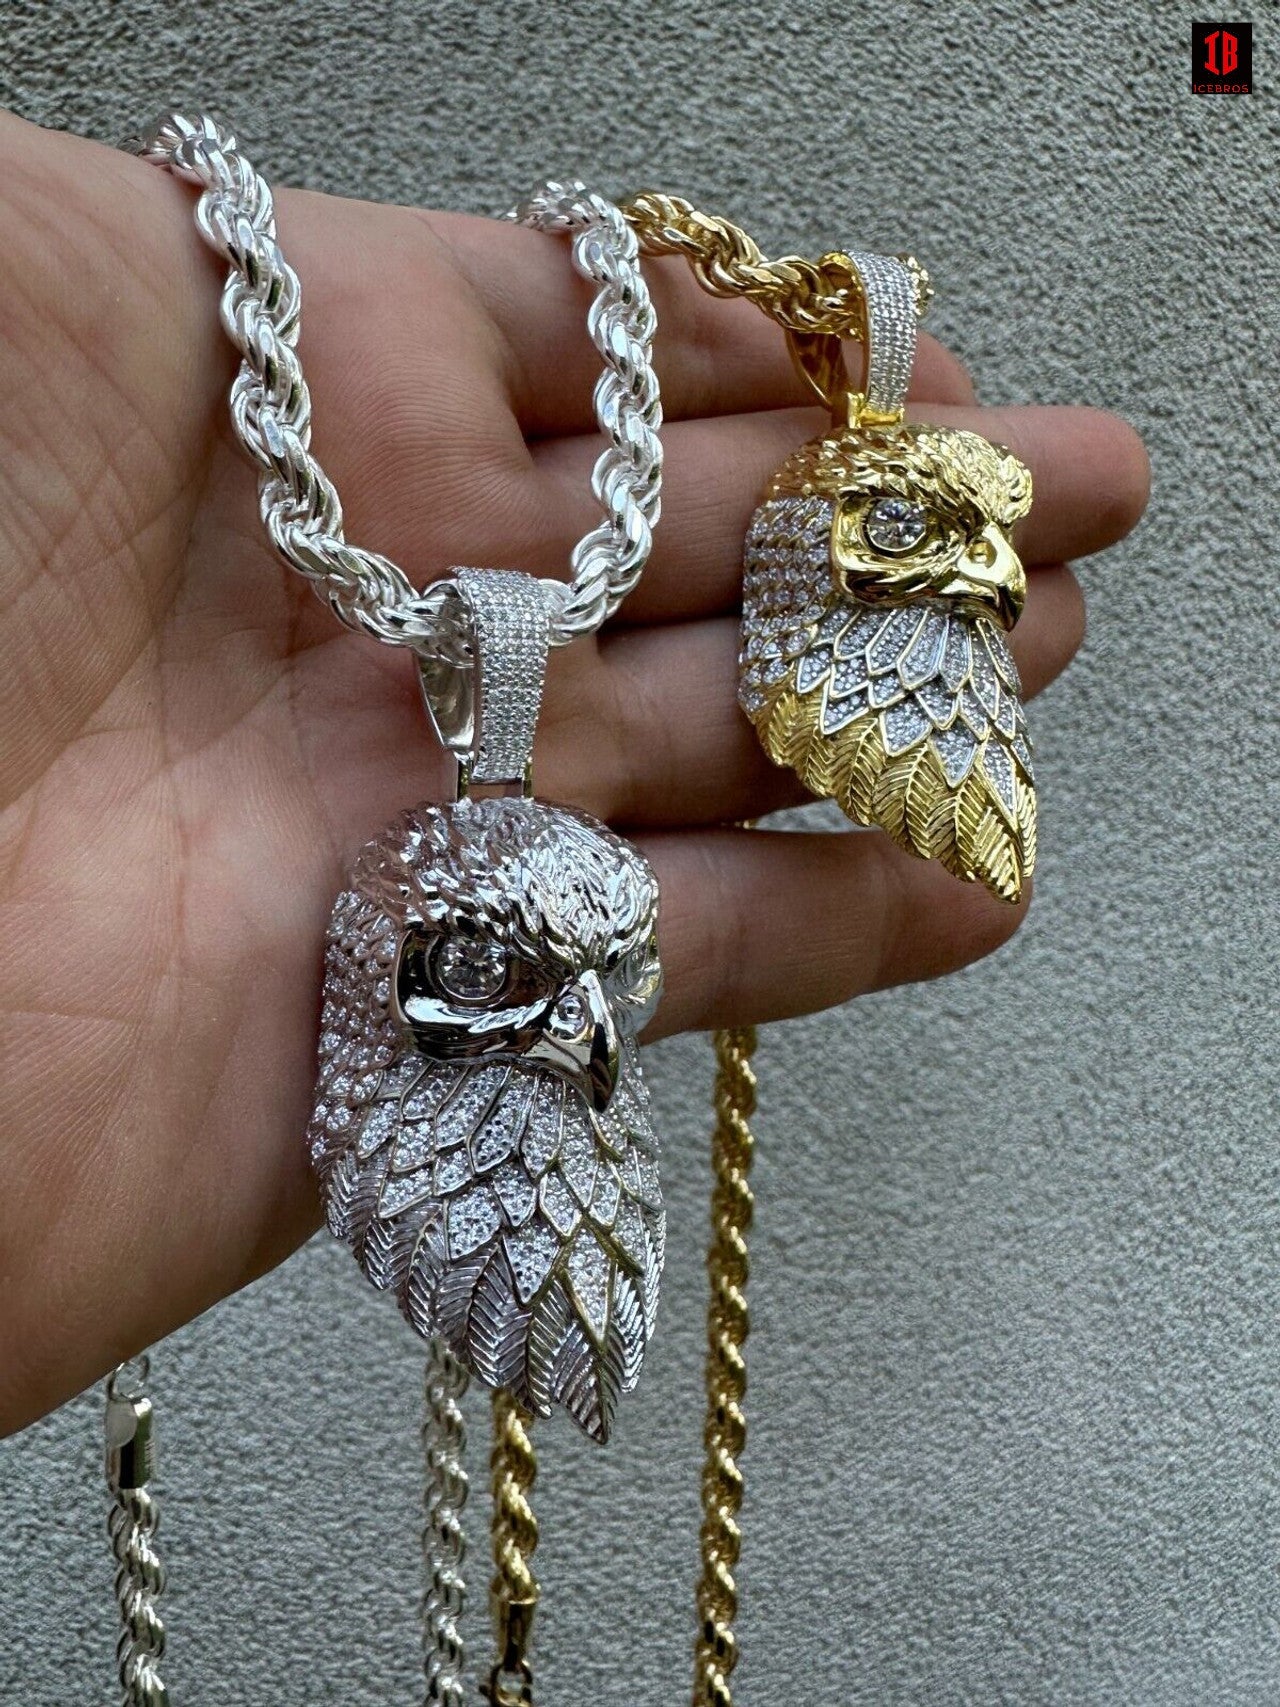 14k White Gold or 14k Gold 3d Bald Eagle Pendant Necklace with Rope Chain 